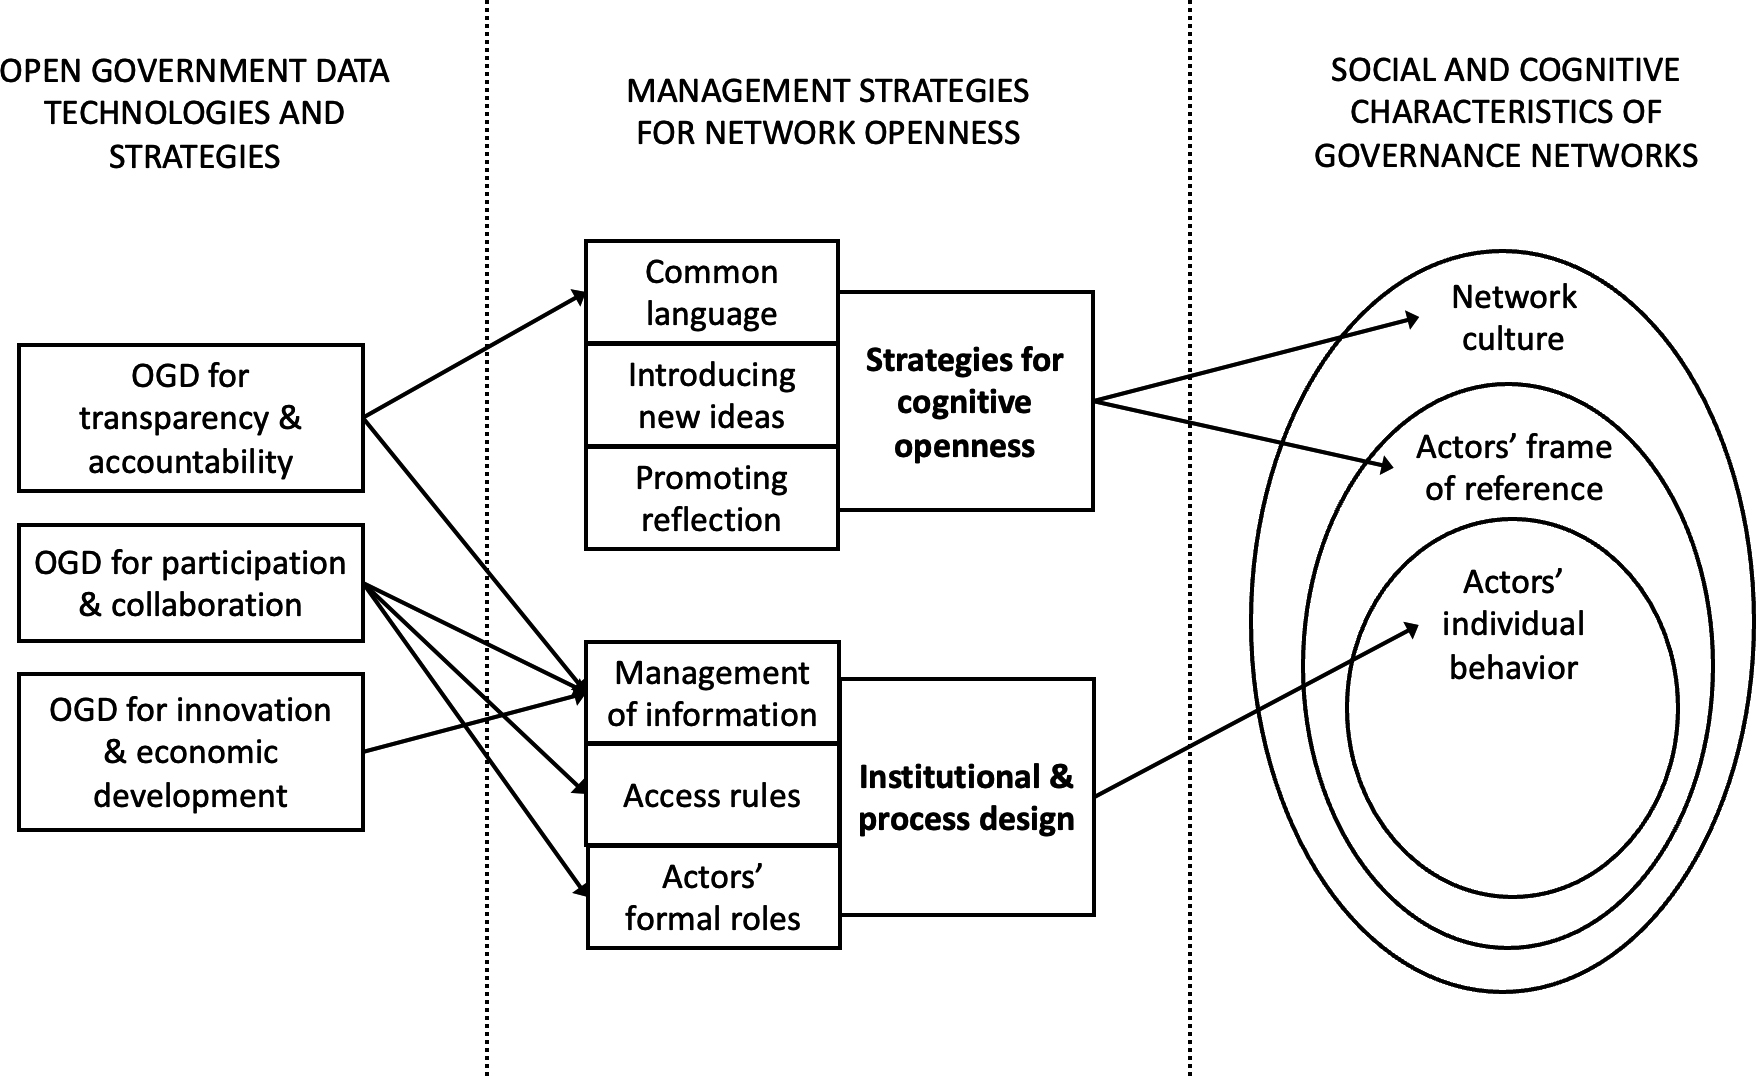 Potential contribution of OGD strategies to governance networks inclusiveness – complete framework. Source: Authors’ own elaboration. Note: Only direct effects are displayed.